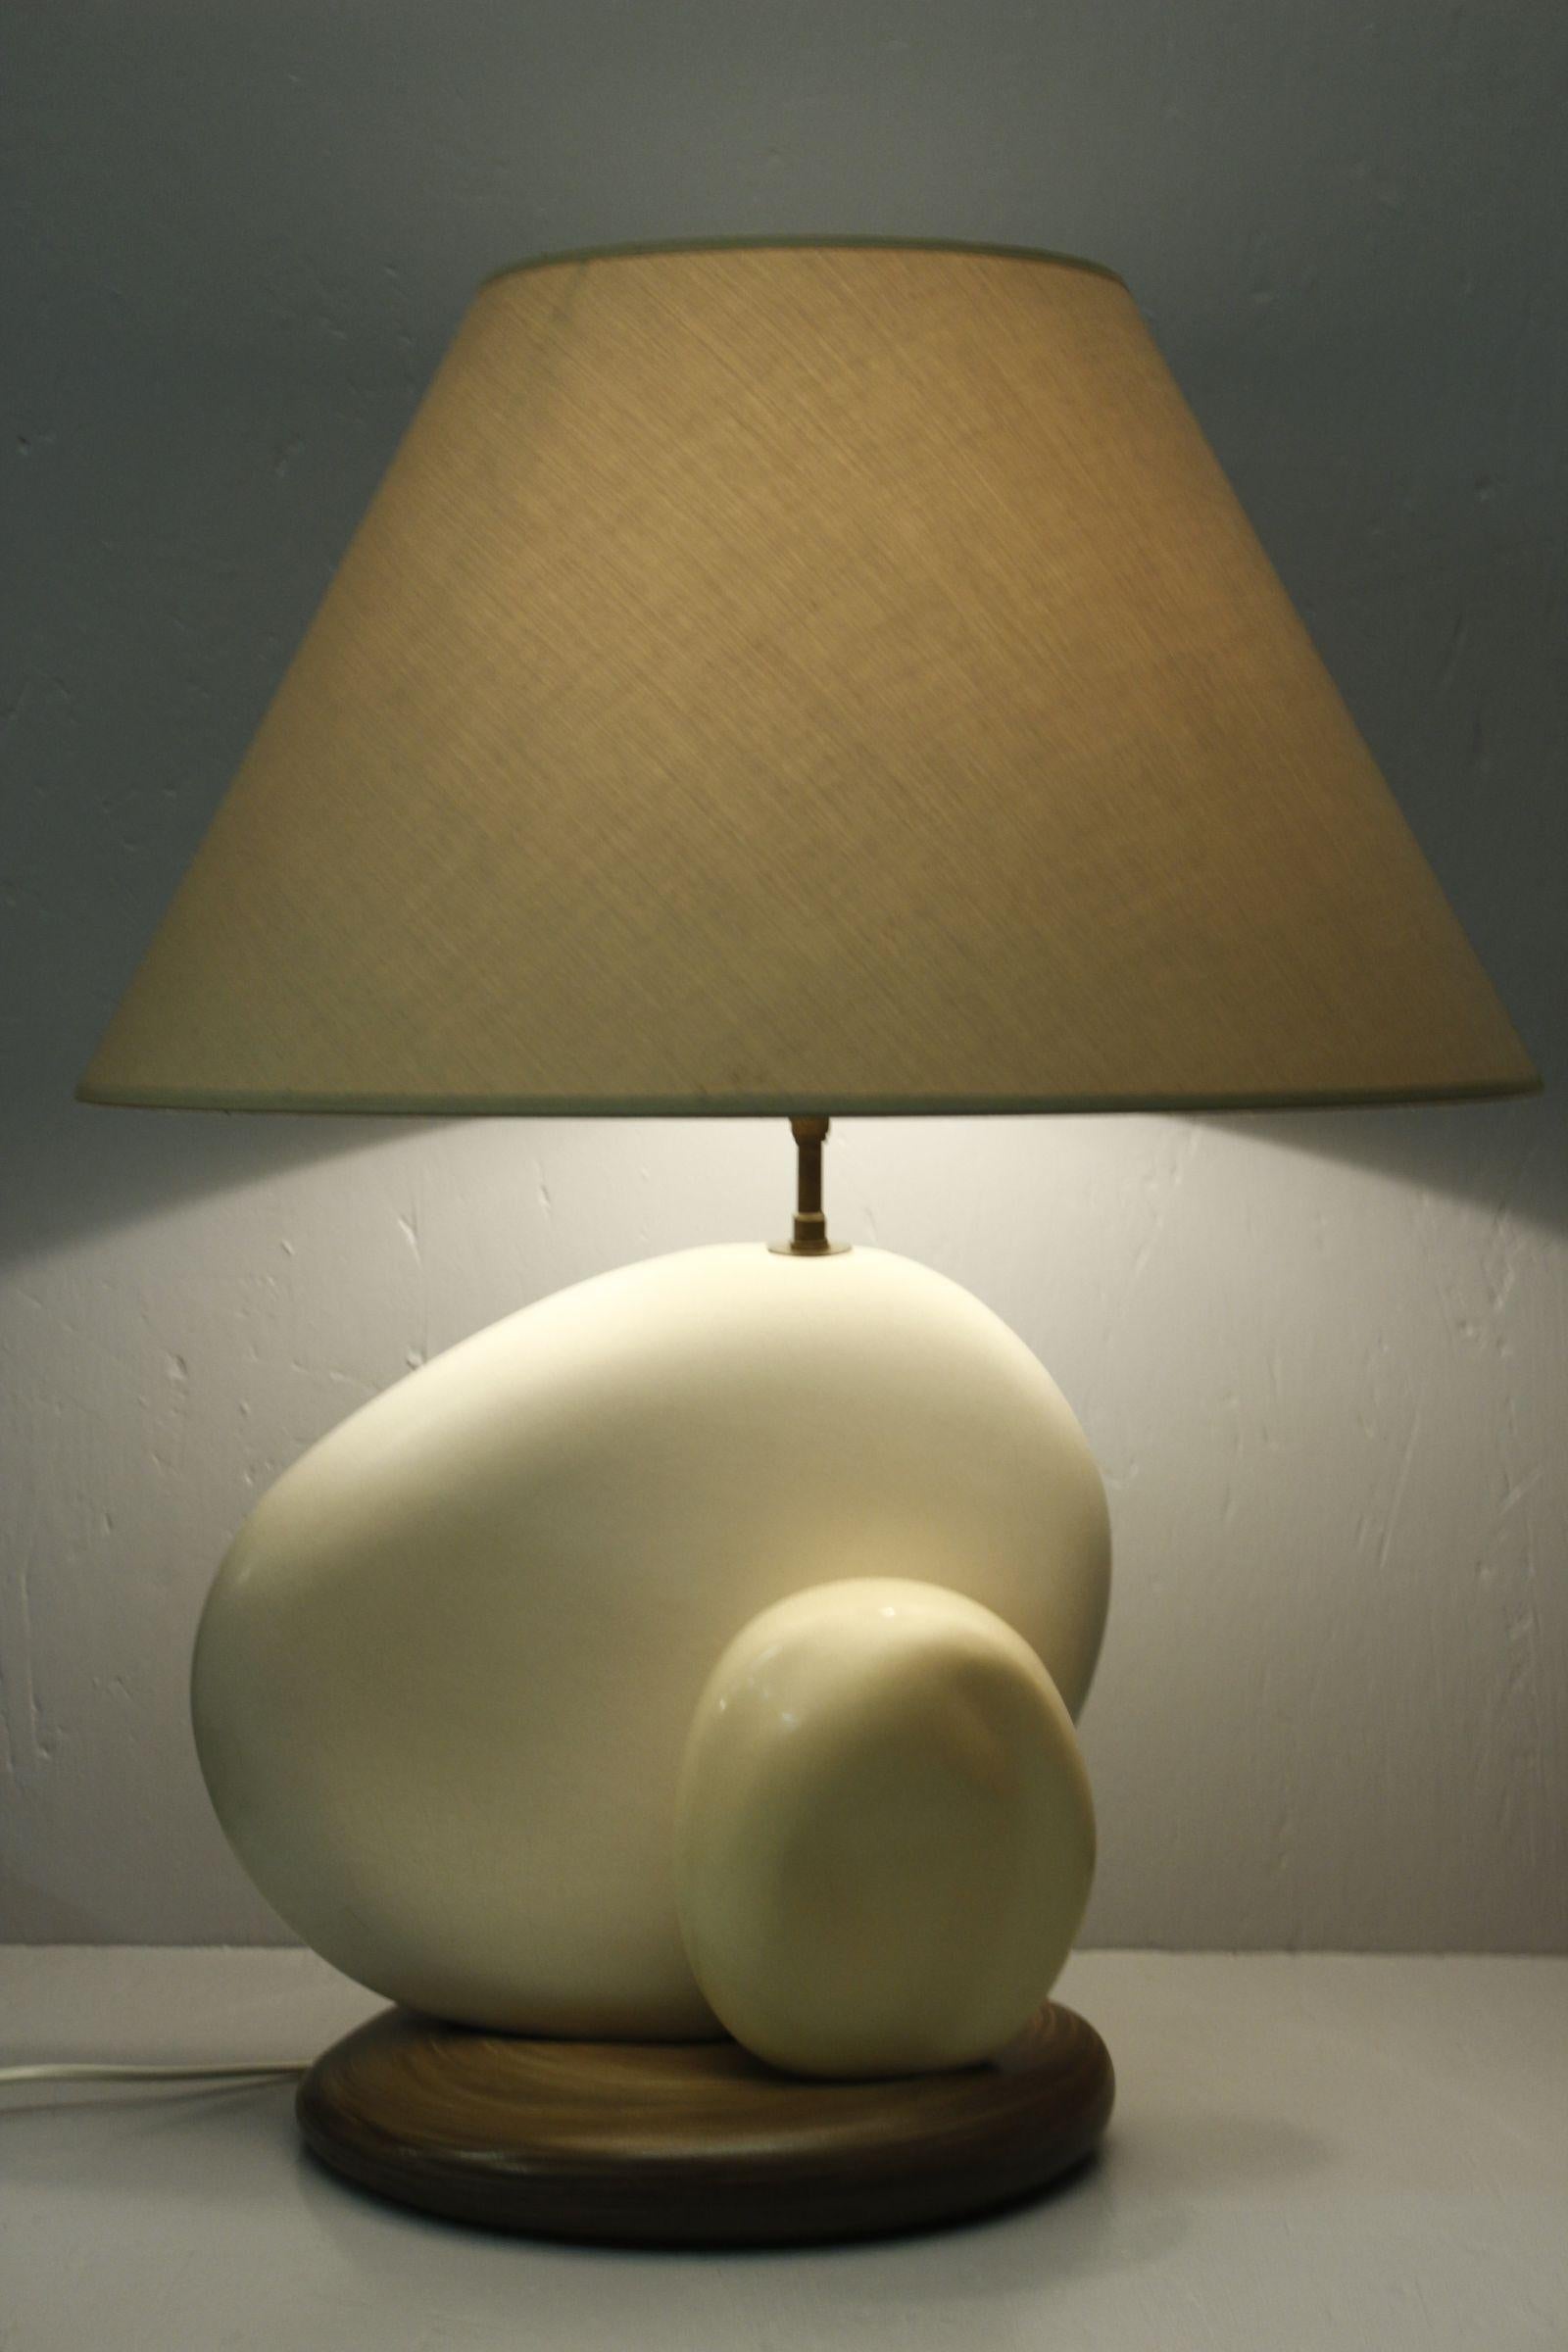 Large pebble ceramic lamp by French designer and lamp maker François Chatain, circa 1980. 

In soft white and brown enamel, with original shade that can be inclined thanks to a pivot below the bulb fitting, meaning one can adjust the intensity and